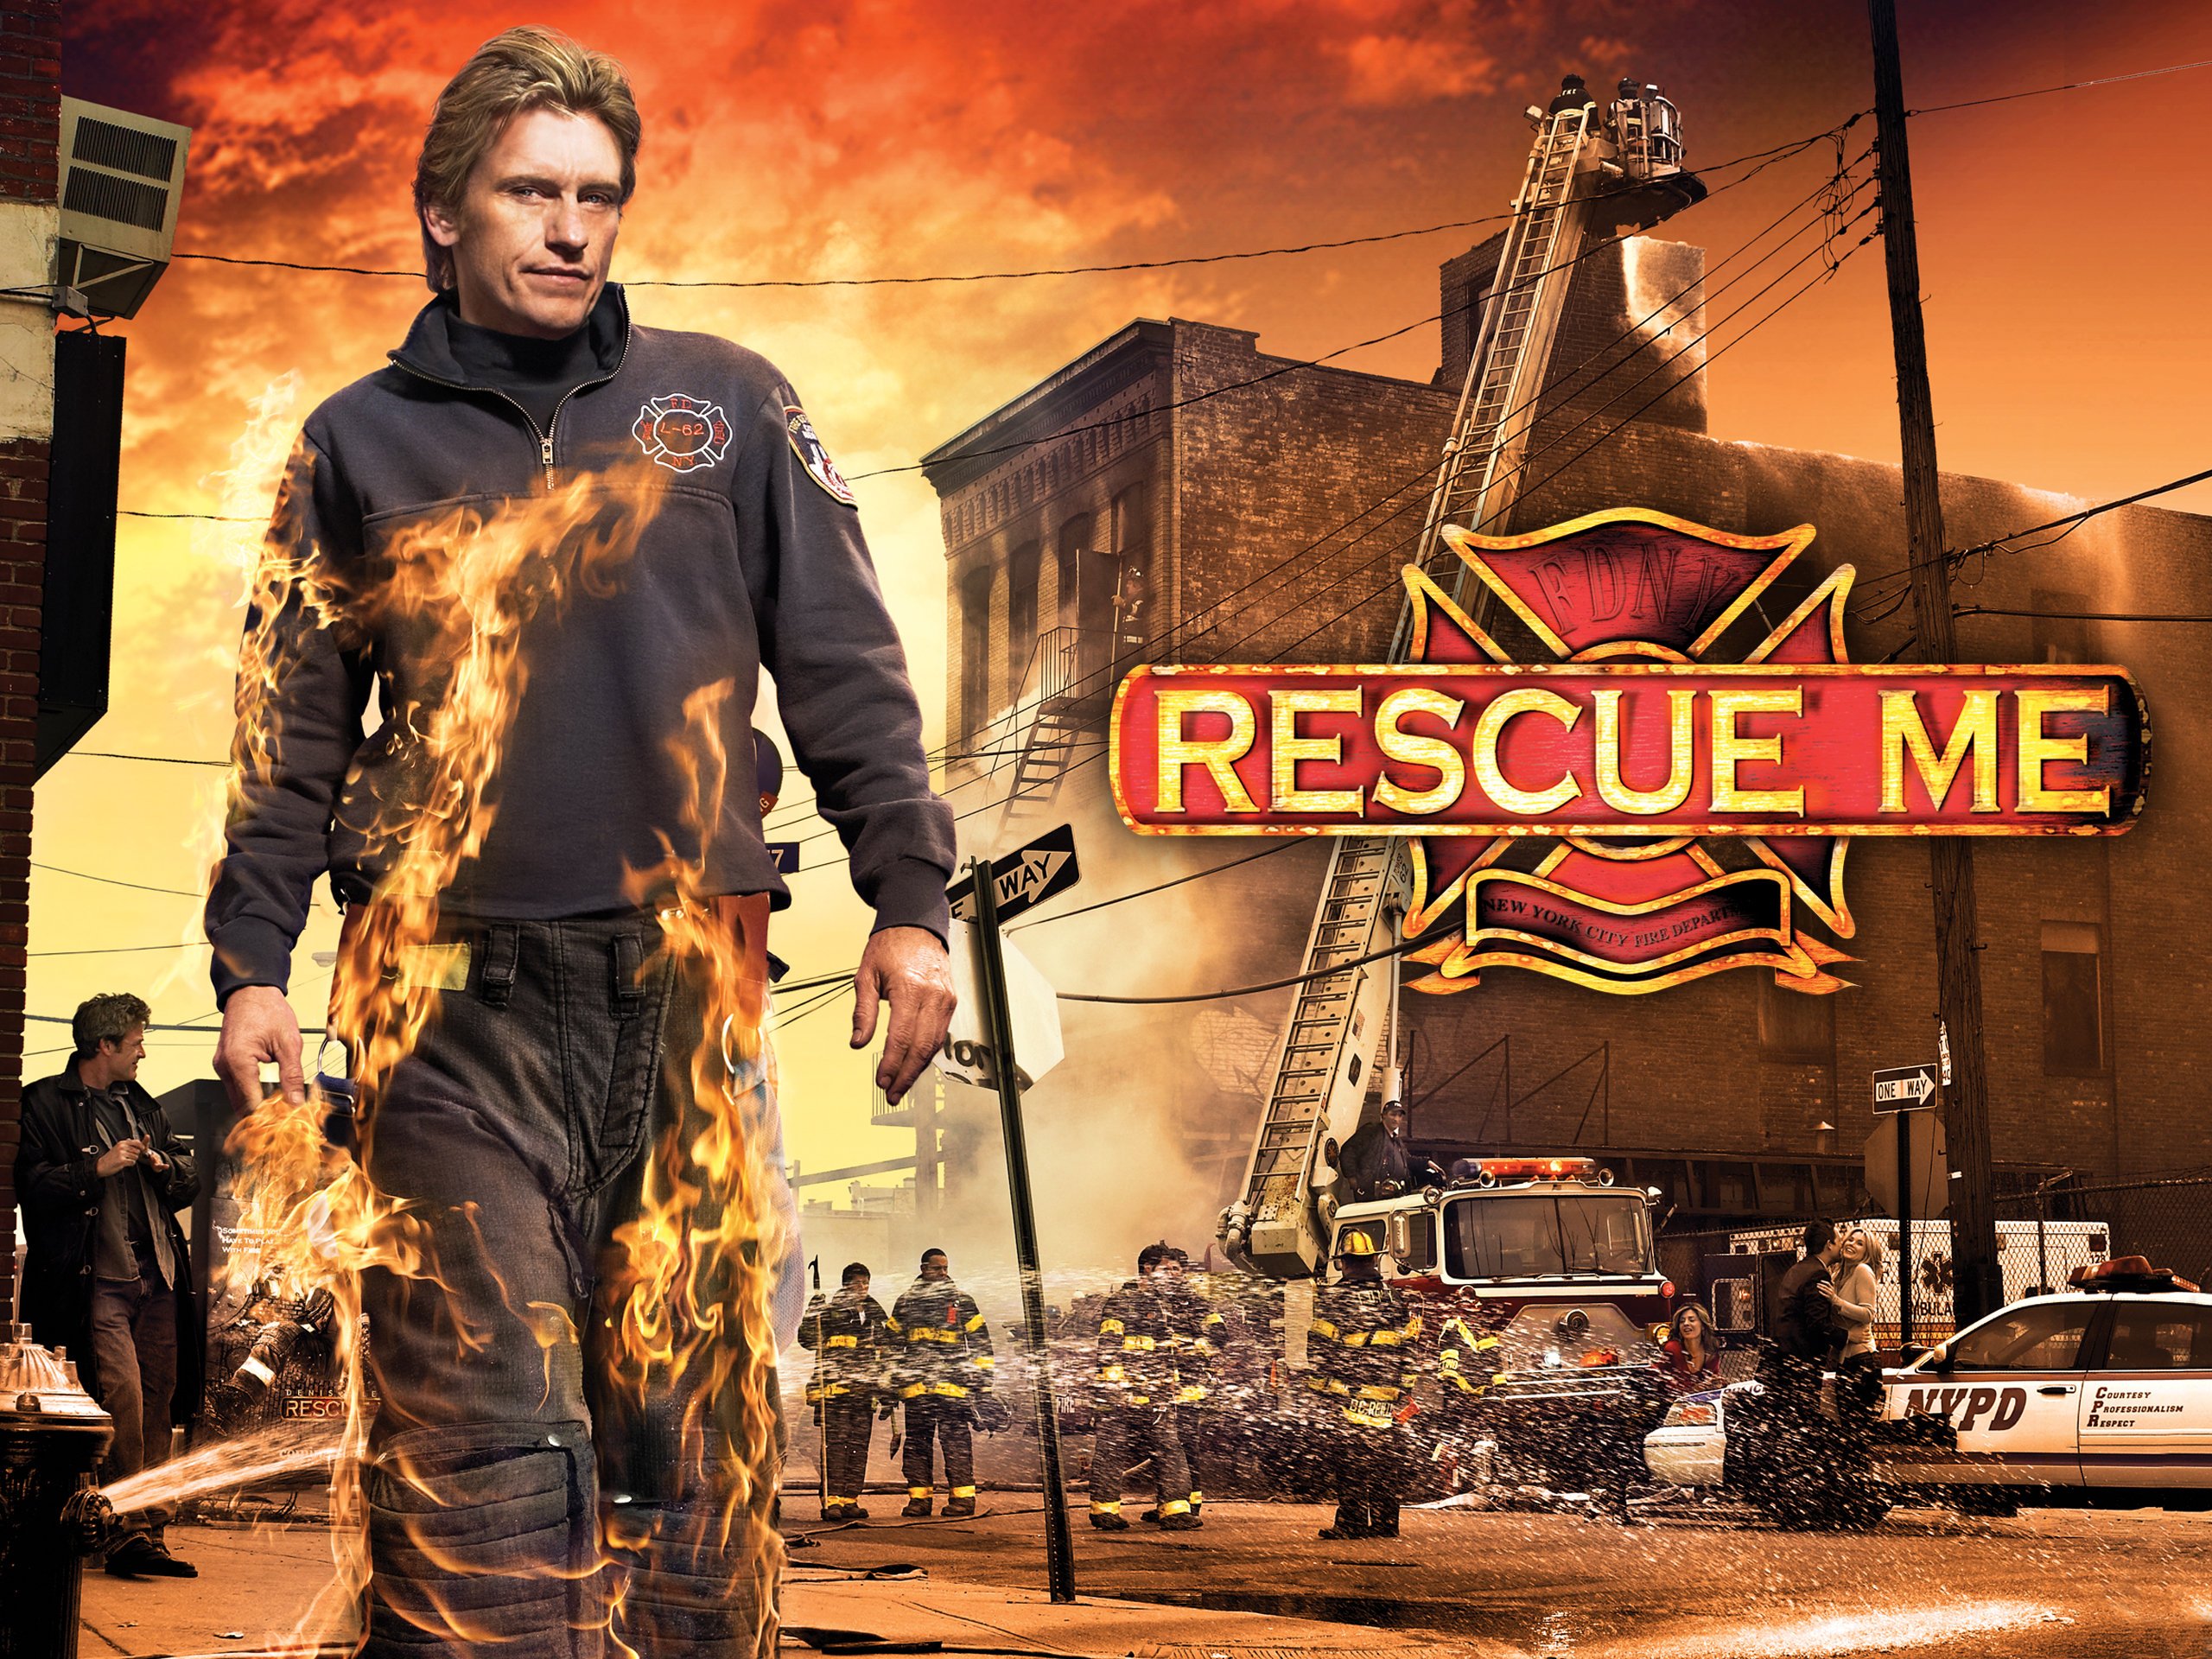 https://static.wikia.nocookie.net/rescueme/images/6/63/Rescue_Me_Season_3_banner.jpg/revision/latest?cb=20200706082442